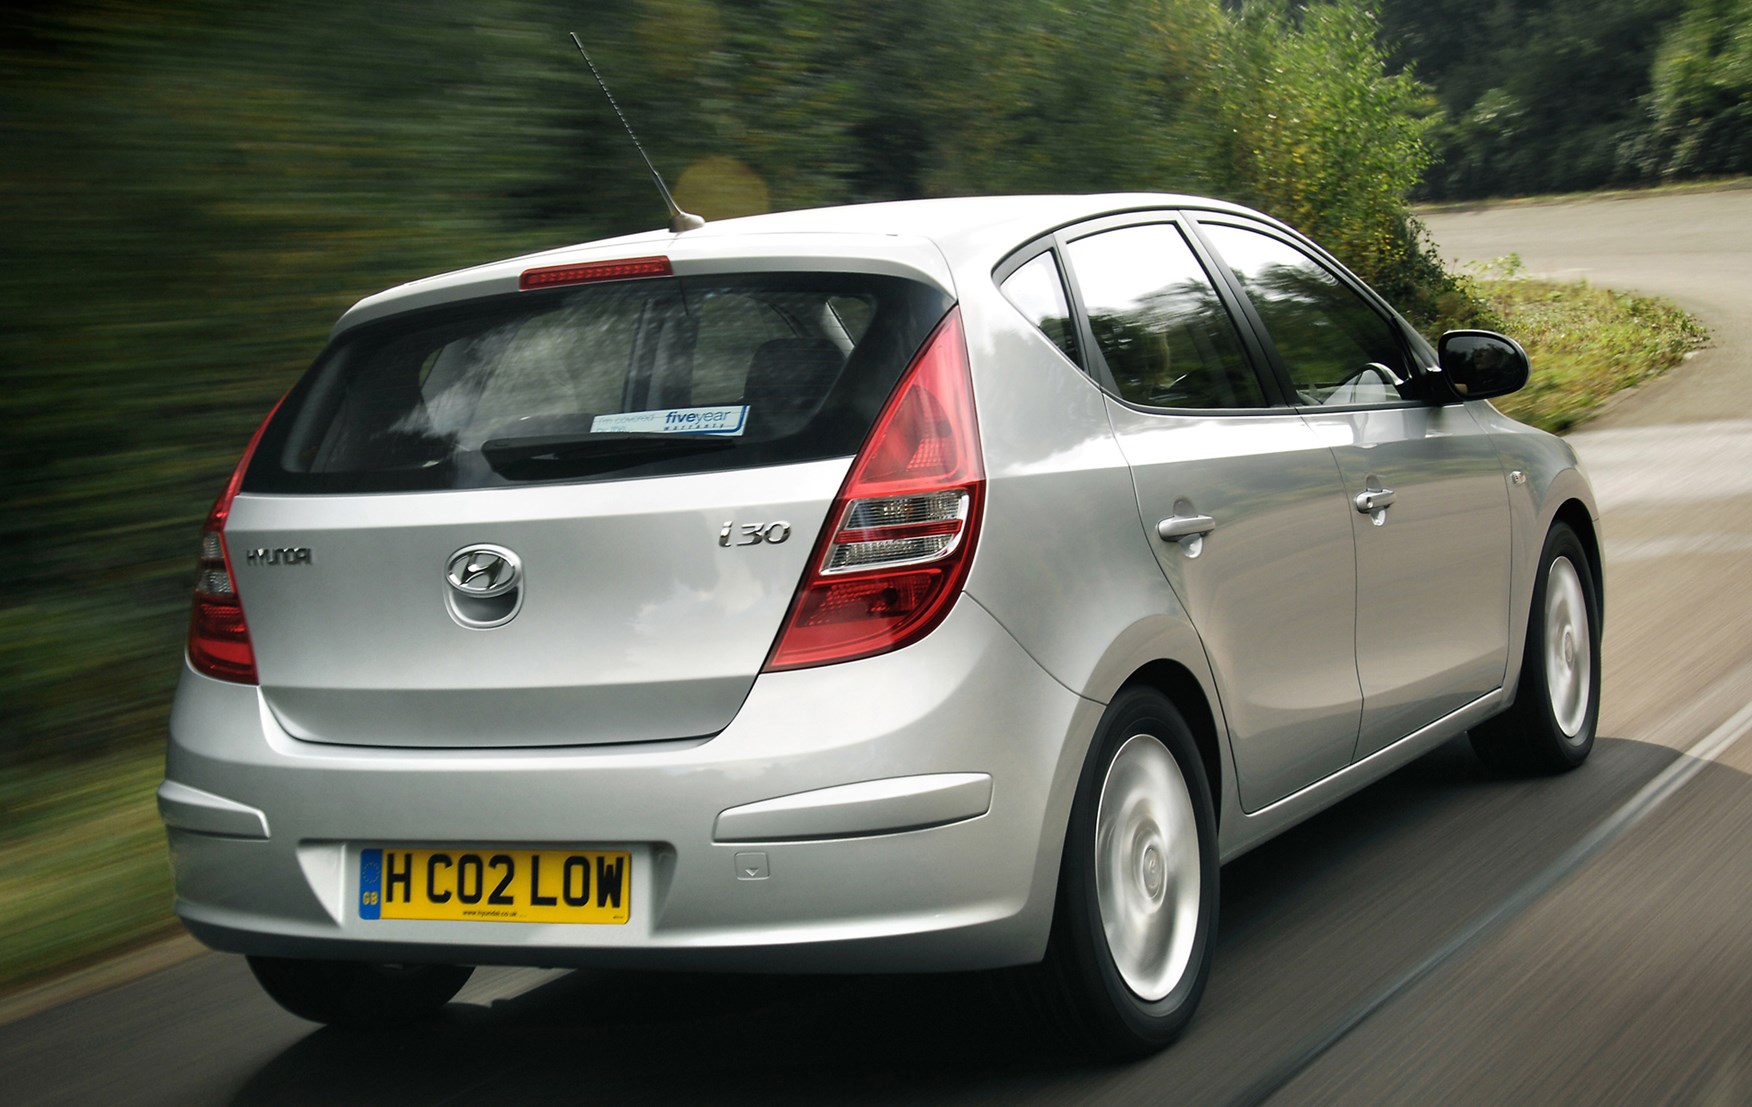 Used Hyundai I30 Hatchback 07 11 Review Parkers